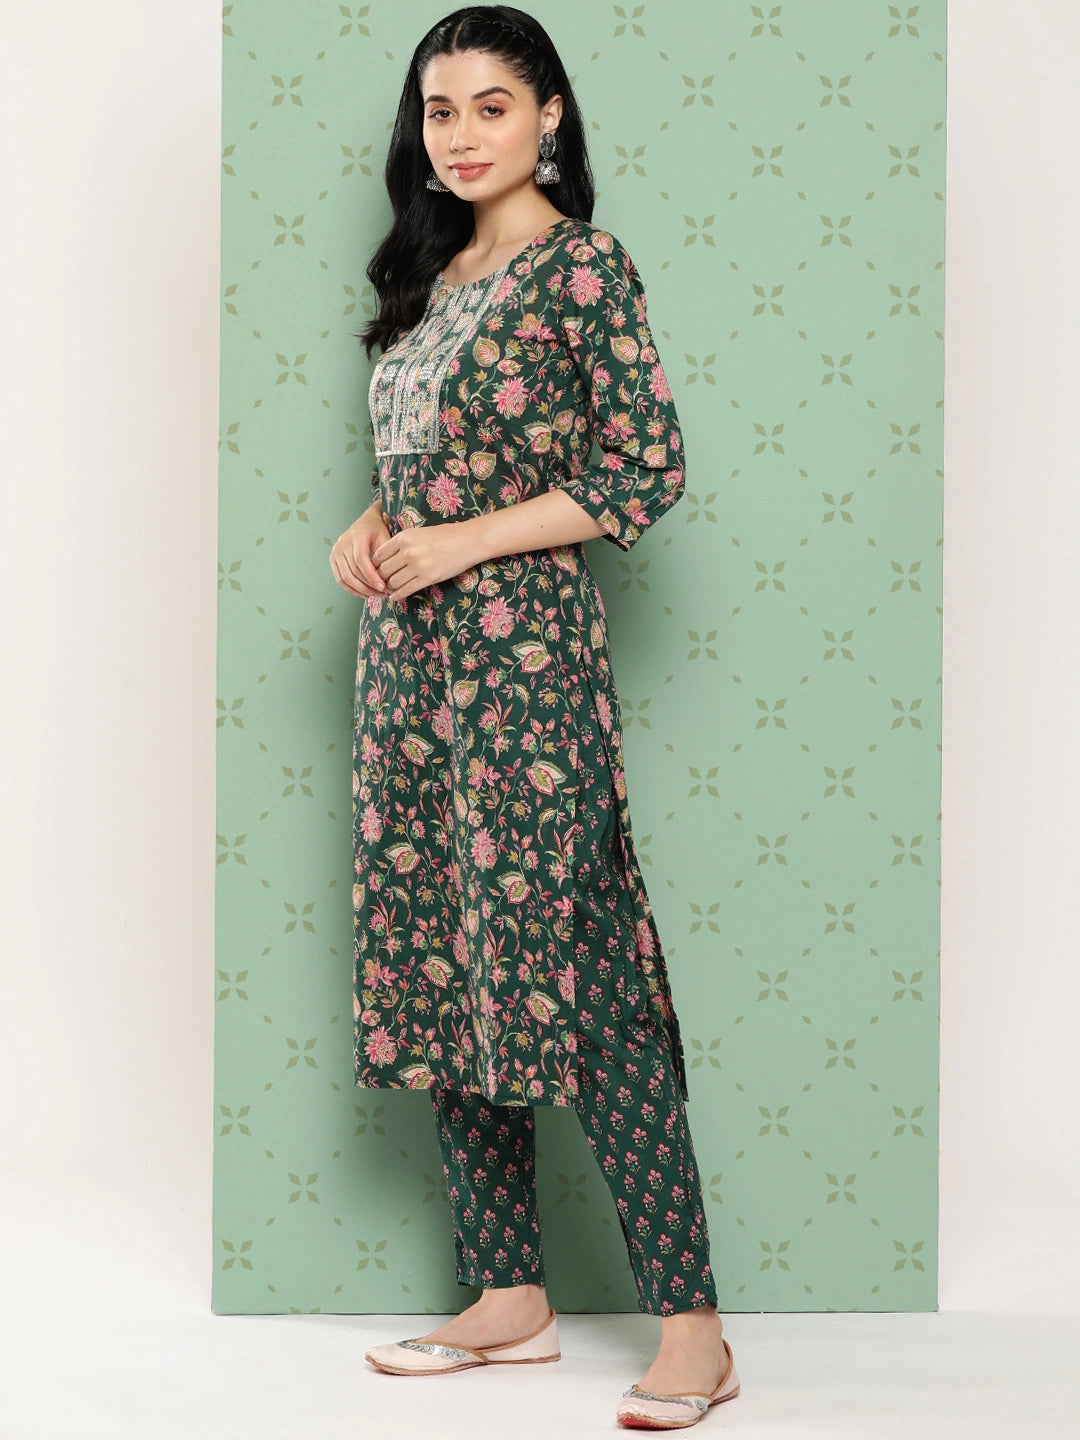 Green Floral Embroidered Pure Cotton Kurta with Trousers & Dupatta Set-Yufta Store-1444SKDTGS